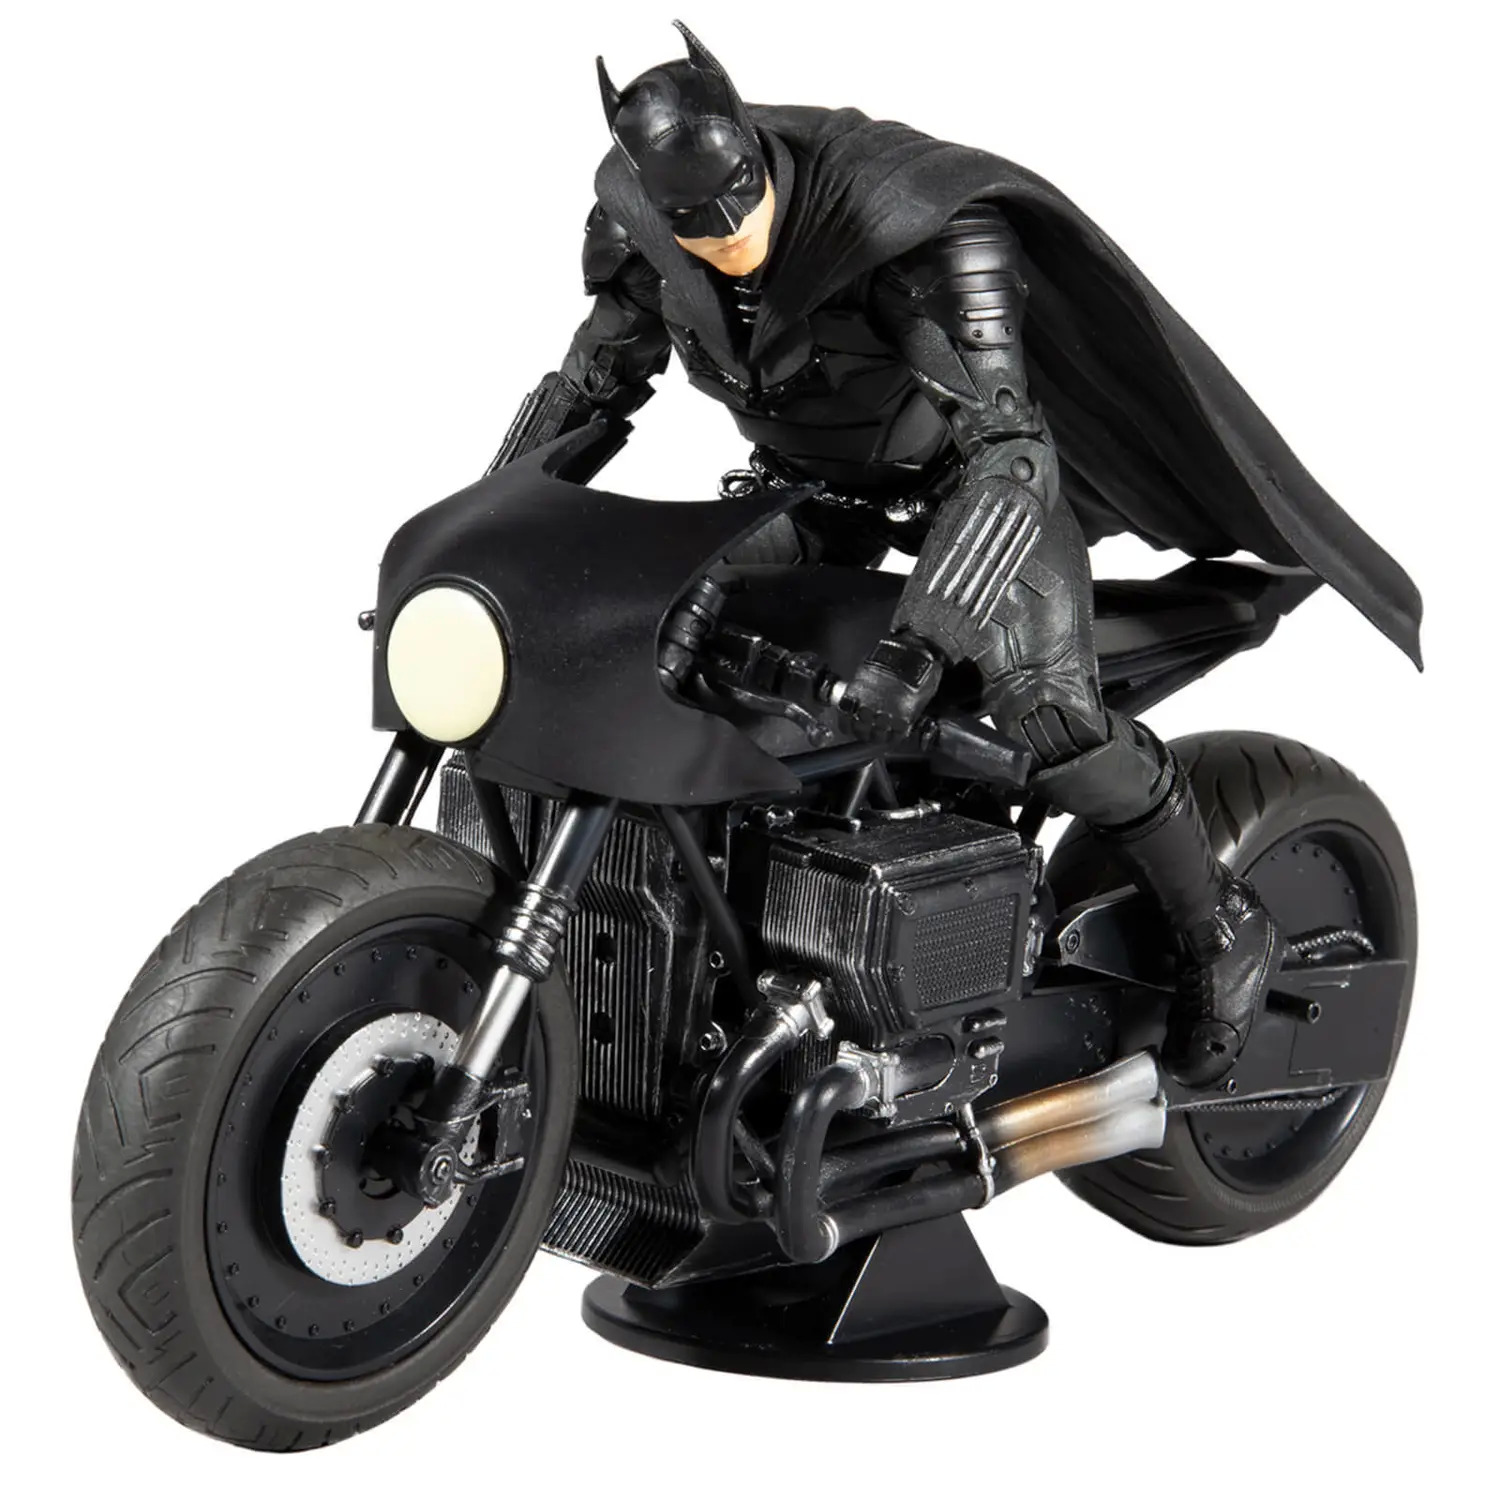 McFarlane Toys 7" DC Multiverse: Batman Collectible Action Figures (The Dark Knight Returns) $14.99 & More + $6 Shipping